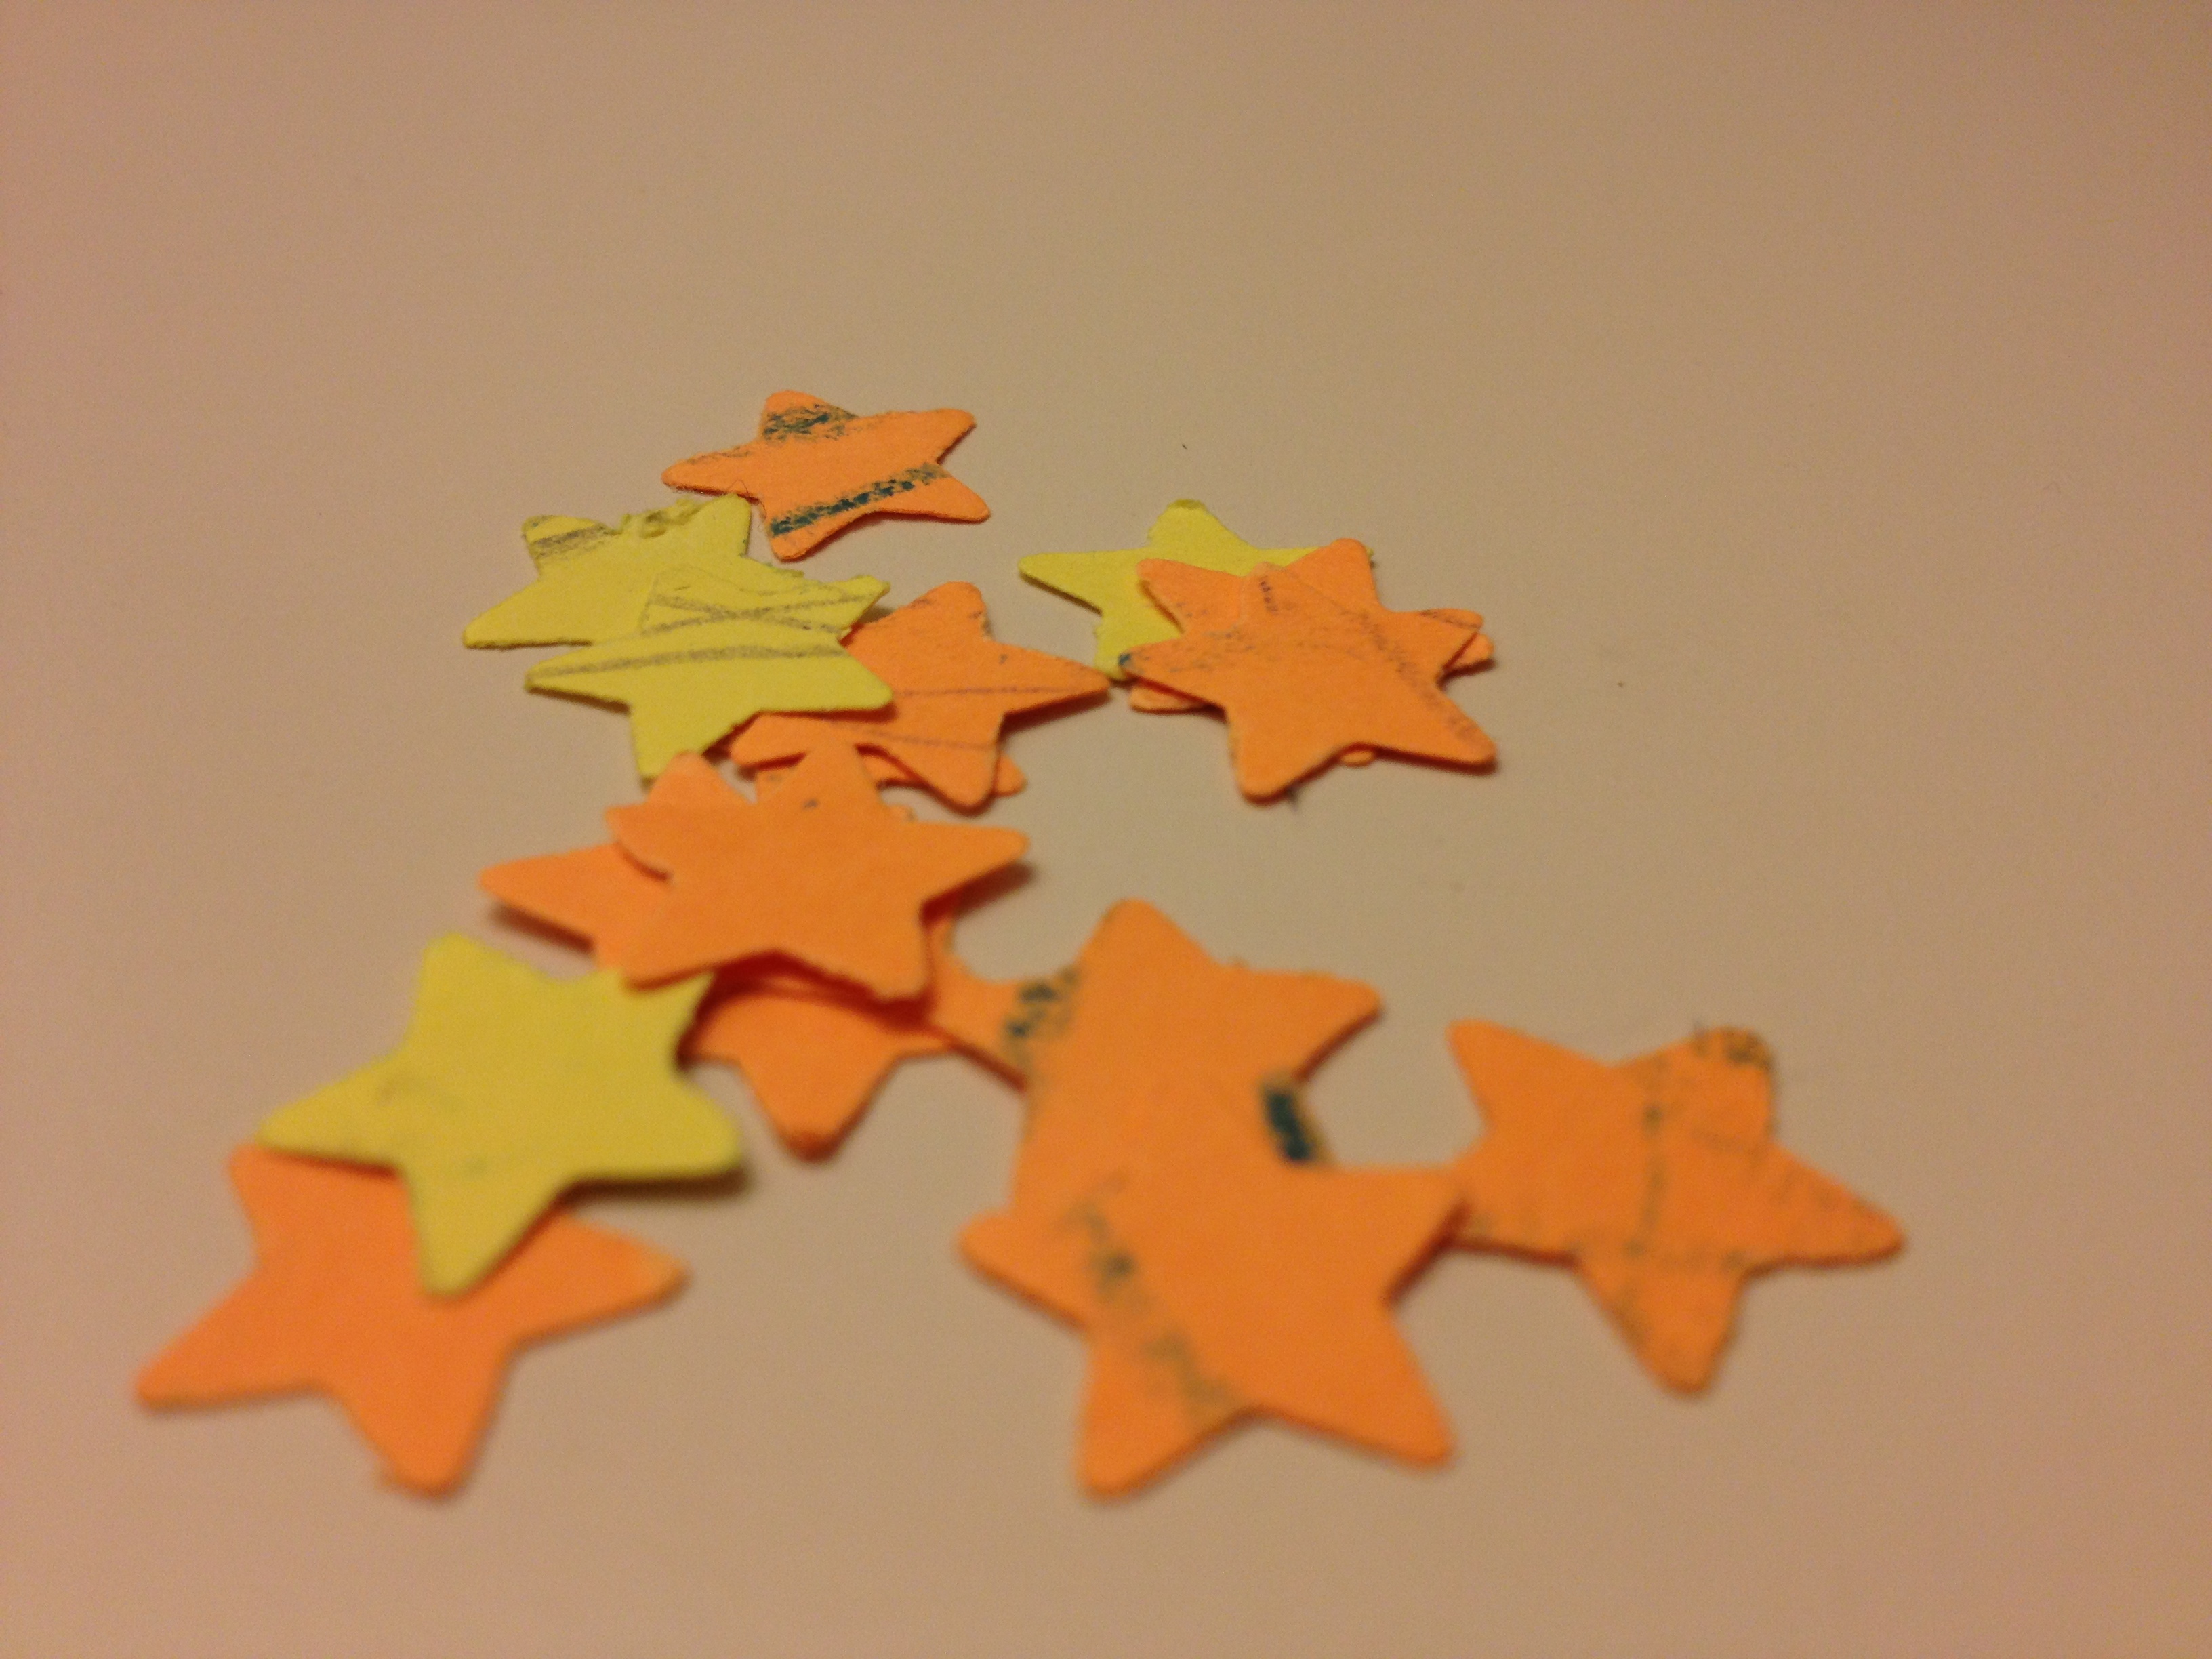 stars rendered by my daughter and I